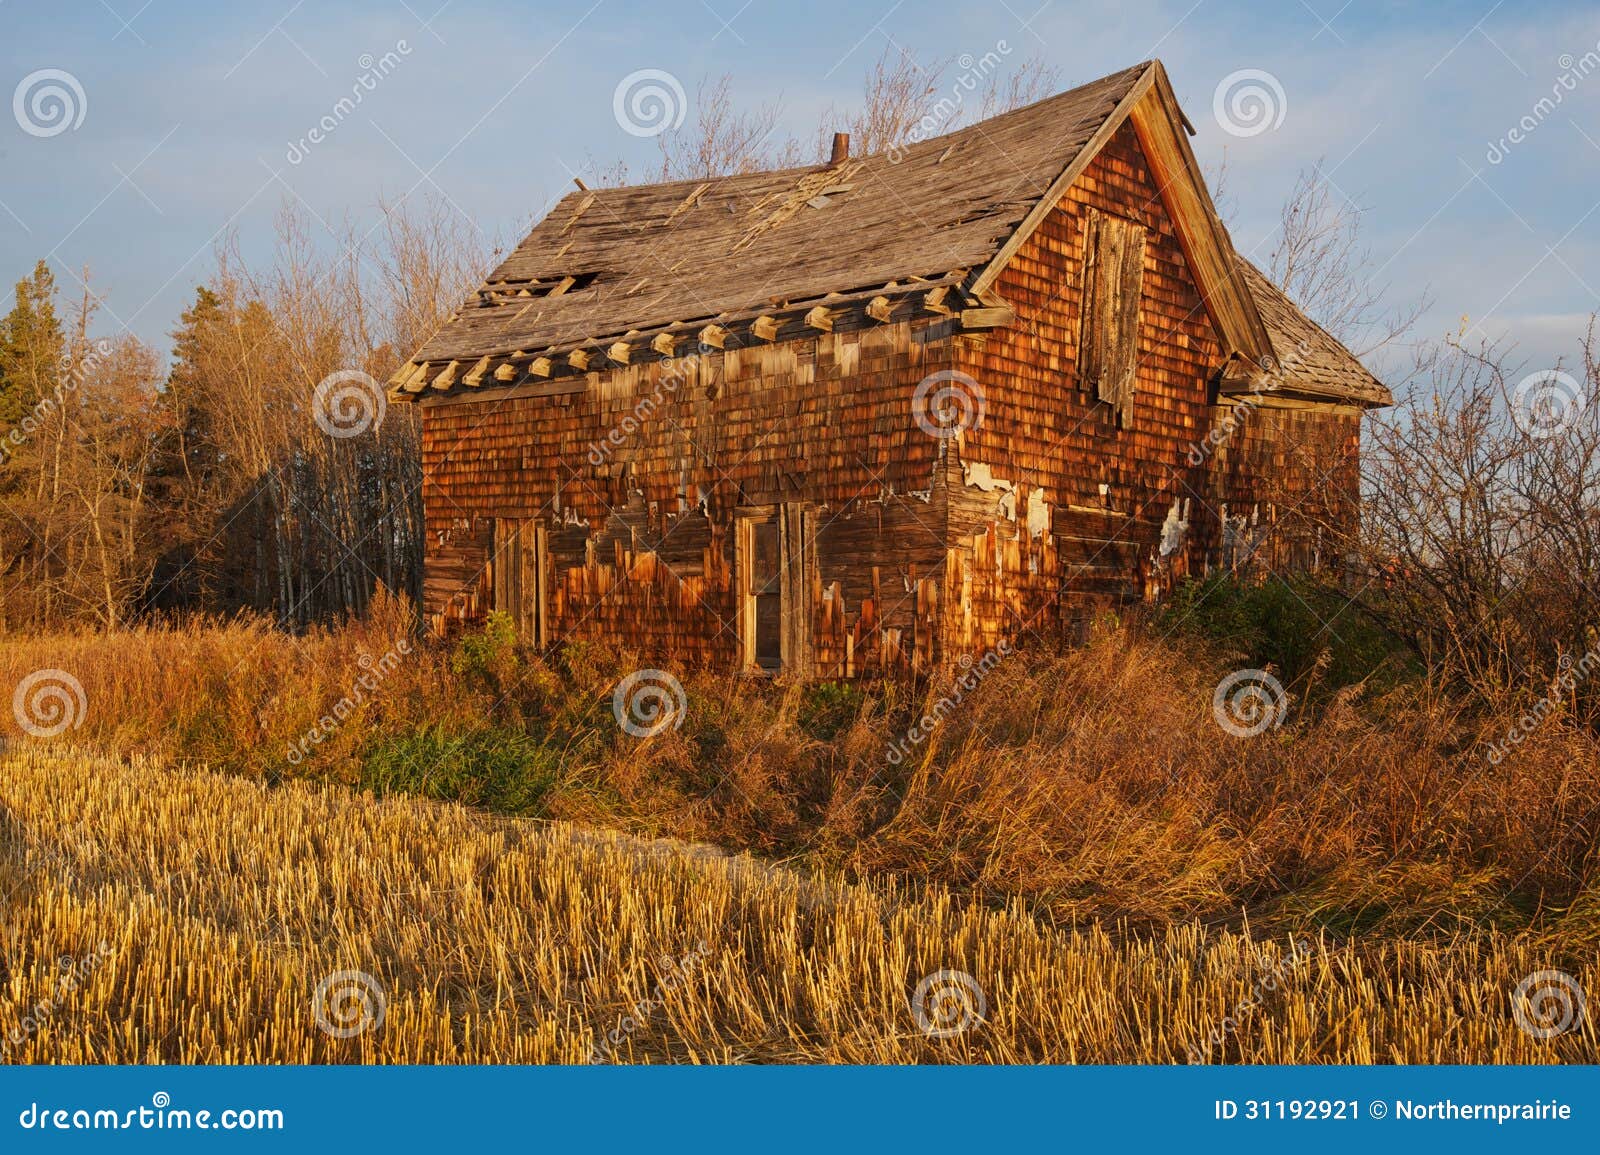 Abandoned House by a Harvested Field at Dawn Stock Image - Image of ...